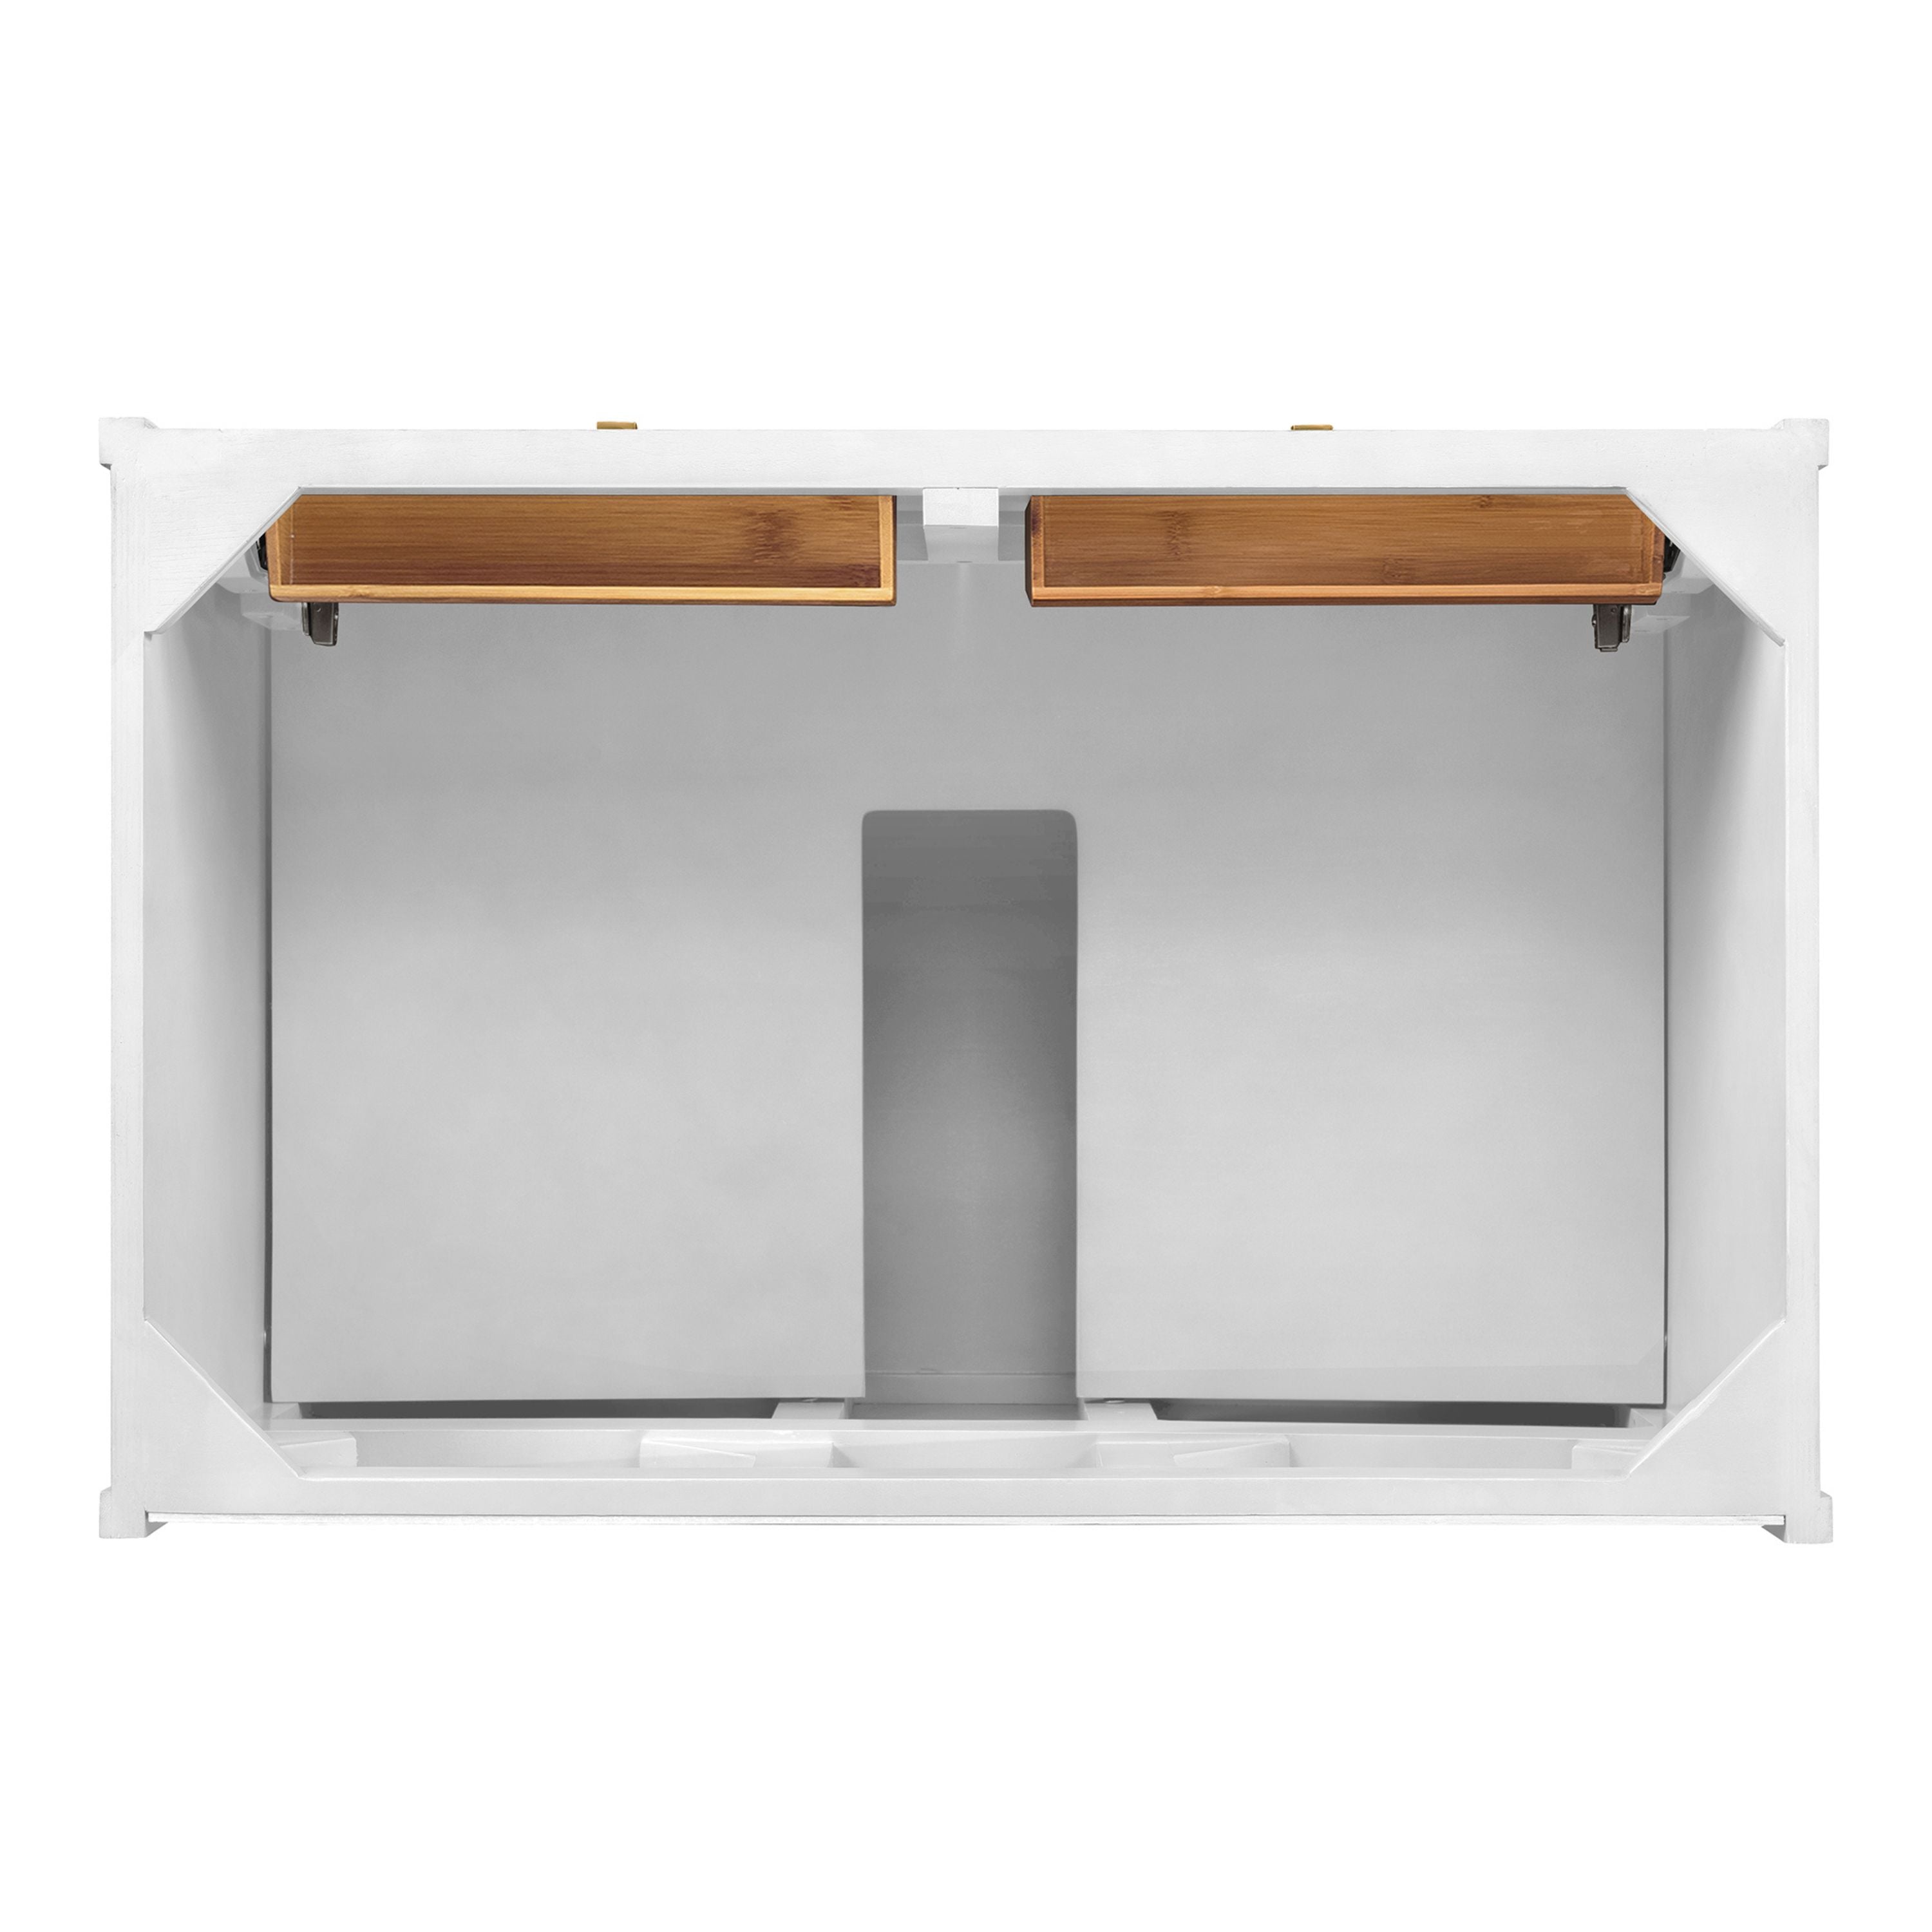 James Martin Vanities Chicago Collection 36 in. Single Vanity in Glossy White, Cabinet Only